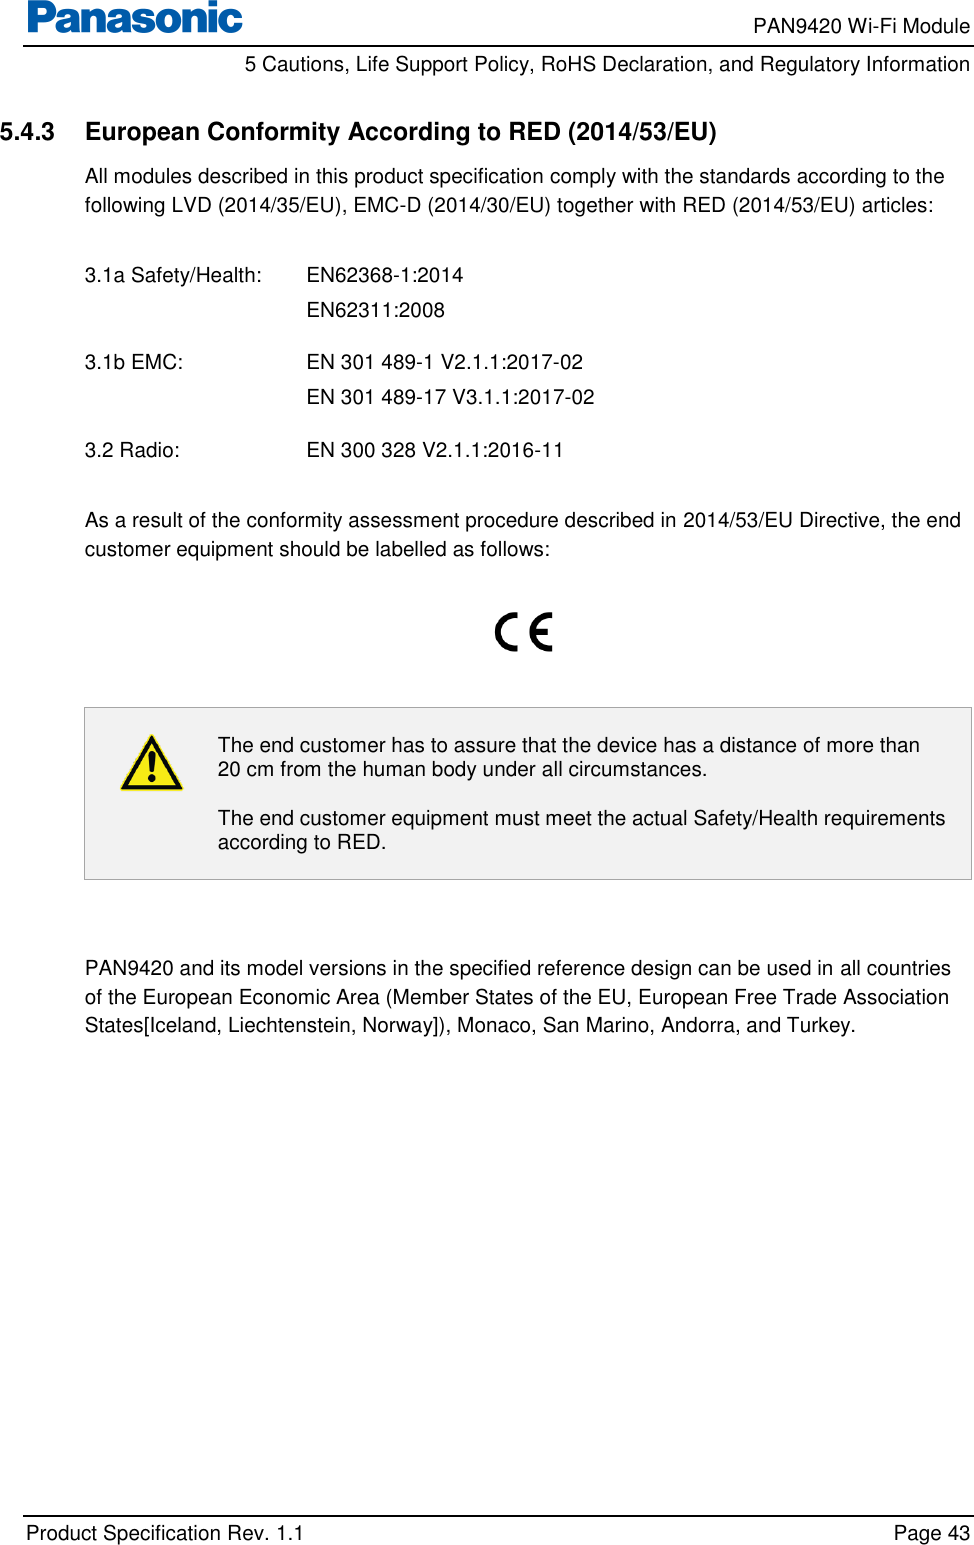     PAN9420 Wi-Fi Module         5 Cautions, Life Support Policy, RoHS Declaration, and Regulatory Information    Product Specification Rev. 1.1    Page 43  5.4.3  European Conformity According to RED (2014/53/EU) All modules described in this product specification comply with the standards according to the following LVD (2014/35/EU), EMC-D (2014/30/EU) together with RED (2014/53/EU) articles:  3.1a Safety/Health:  EN62368-1:2014 EN62311:2008  3.1b EMC:    EN 301 489-1 V2.1.1:2017-02 EN 301 489-17 V3.1.1:2017-02  3.2 Radio:    EN 300 328 V2.1.1:2016-11  As a result of the conformity assessment procedure described in 2014/53/EU Directive, the end customer equipment should be labelled as follows:     The end customer has to assure that the device has a distance of more than 20 cm from the human body under all circumstances. The end customer equipment must meet the actual Safety/Health requirements according to RED.   PAN9420 and its model versions in the specified reference design can be used in all countries of the European Economic Area (Member States of the EU, European Free Trade Association States[Iceland, Liechtenstein, Norway]), Monaco, San Marino, Andorra, and Turkey.  